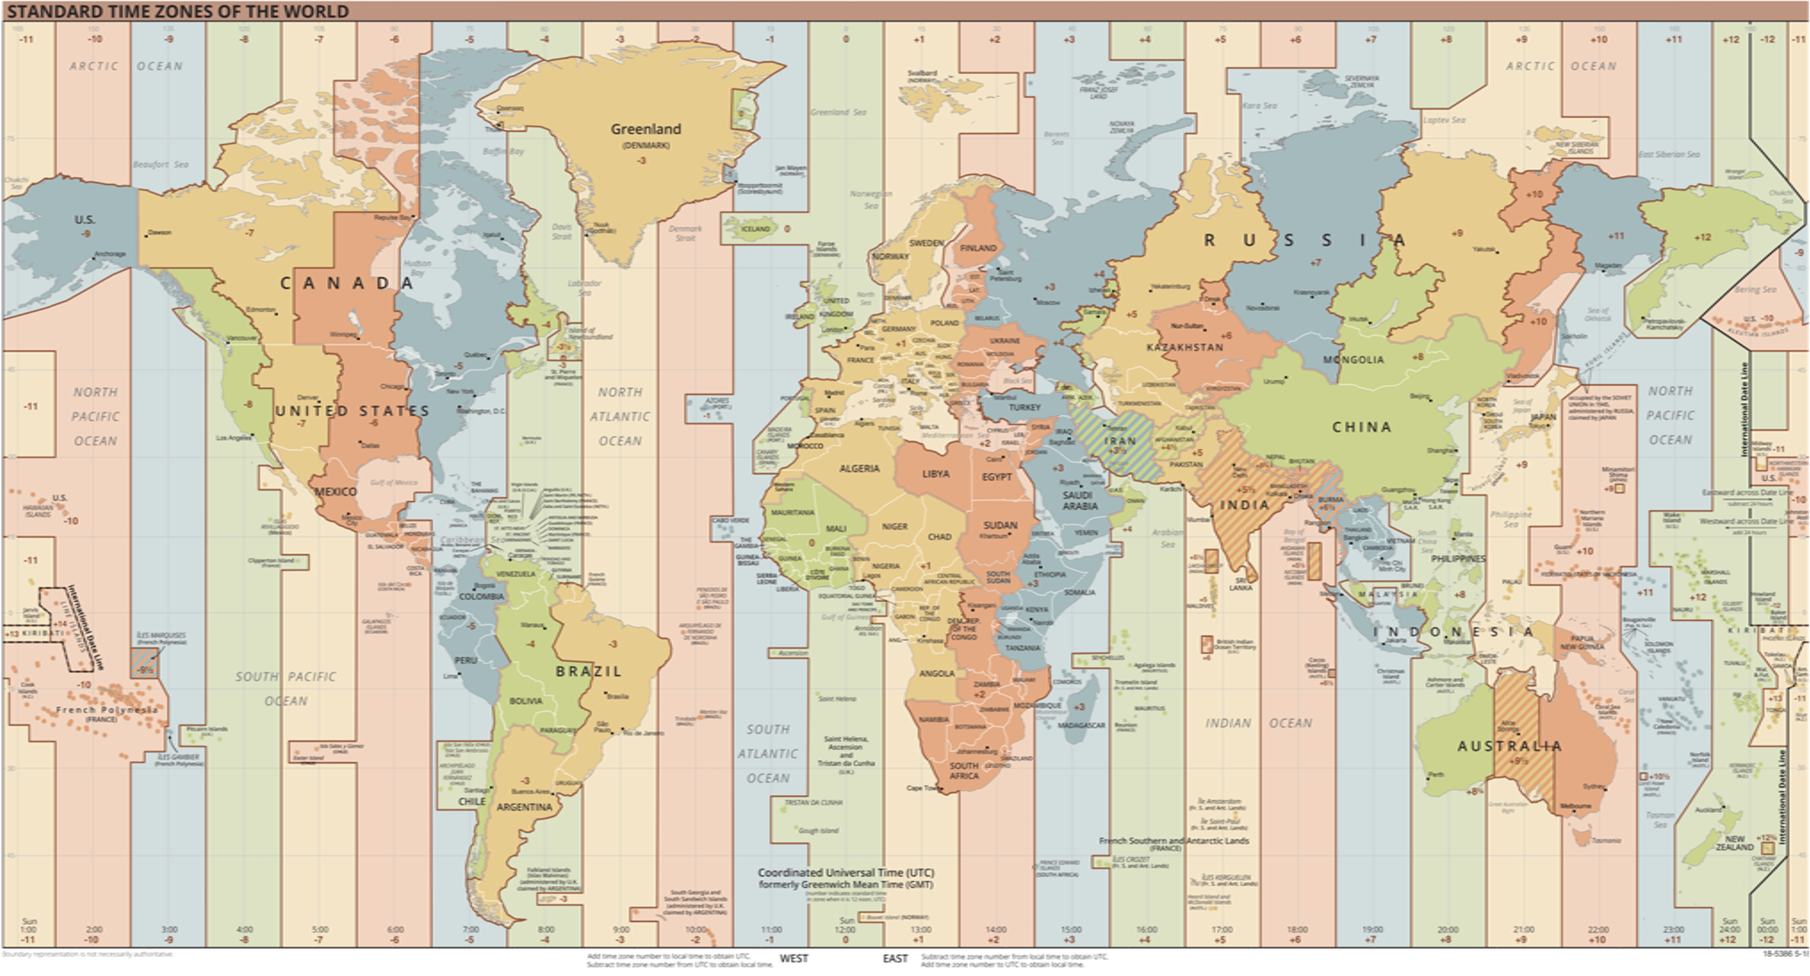 https://upload.wikimedia.org/wikipedia/commons/8/88/World_Time_Zones_Map.png